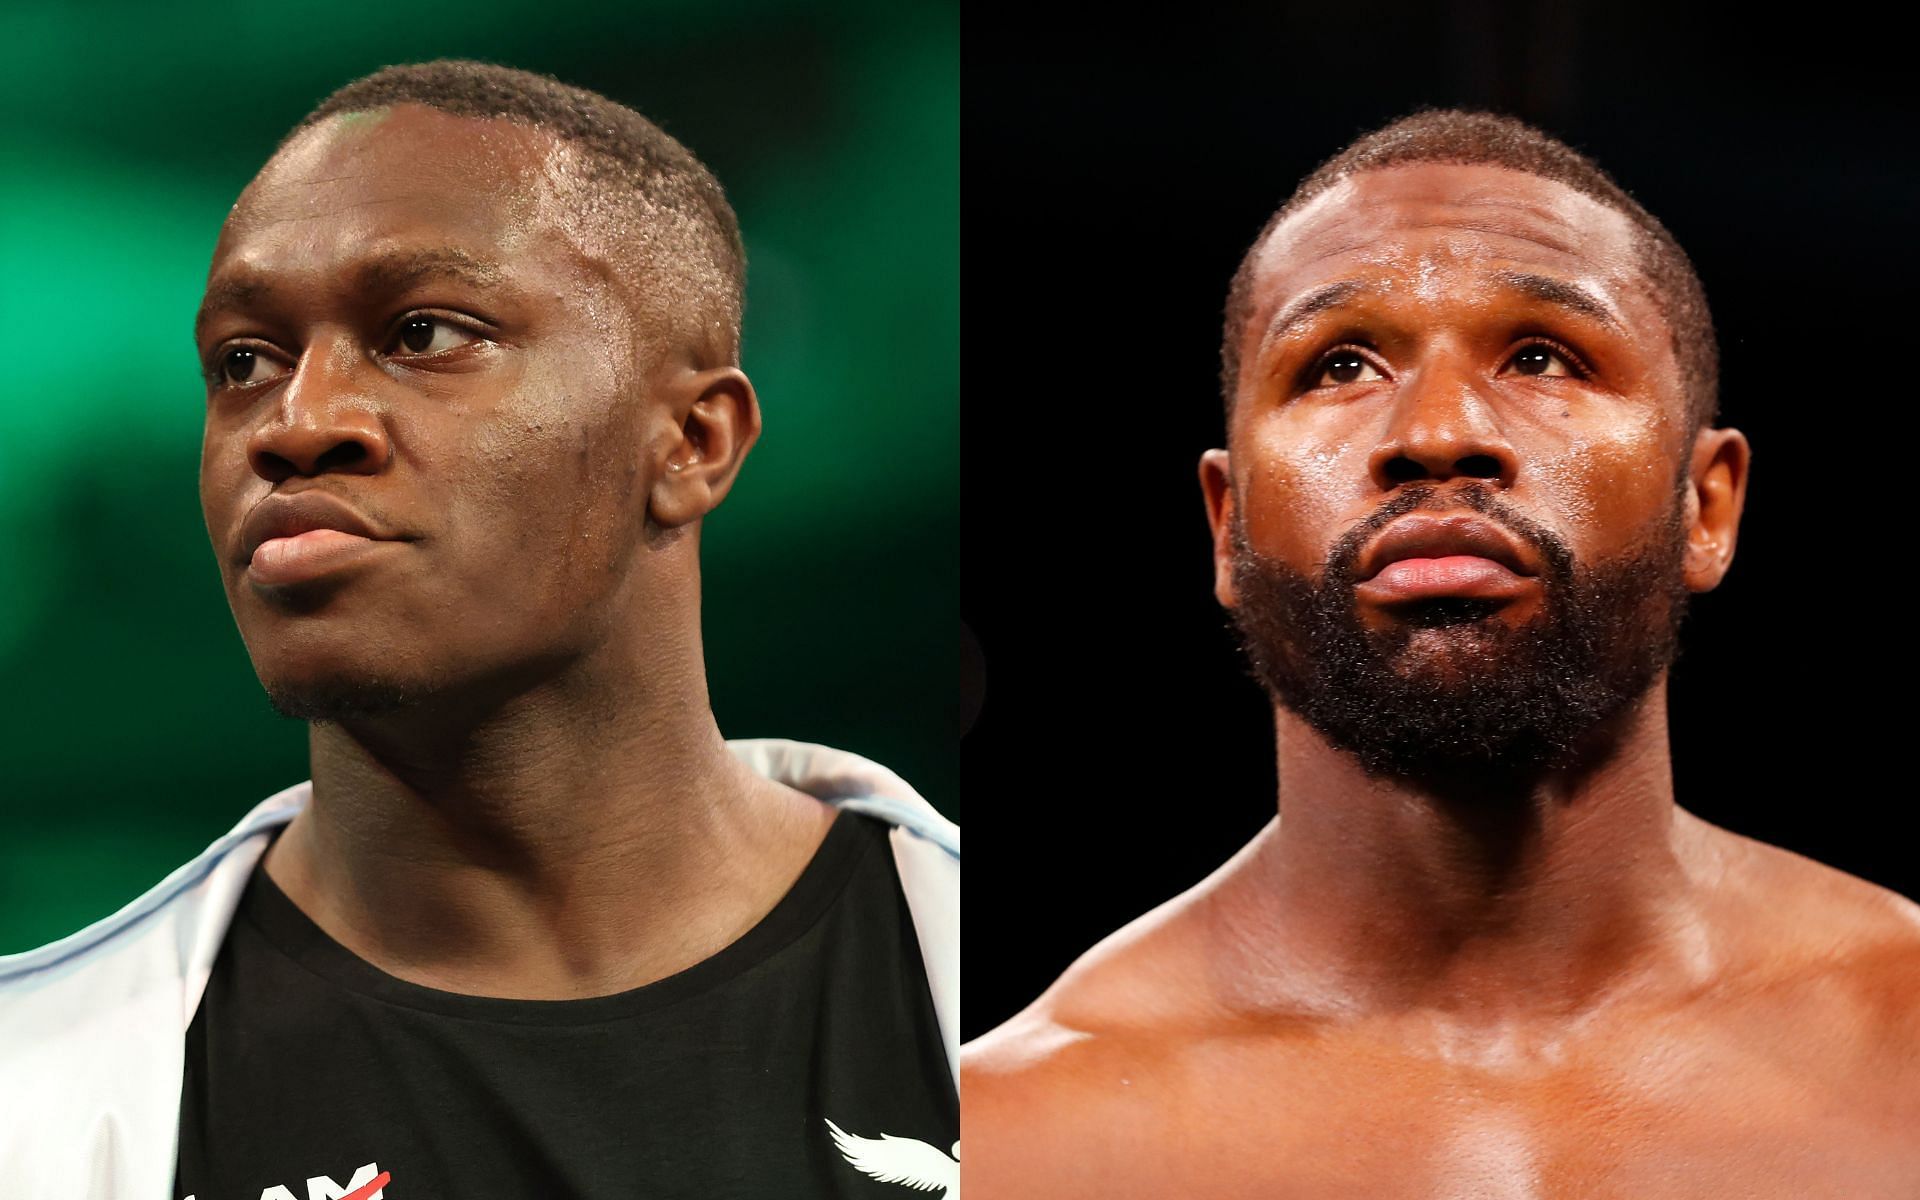 Deji (left) and Floyd Mayweather (right) (Image credits Getty Images)